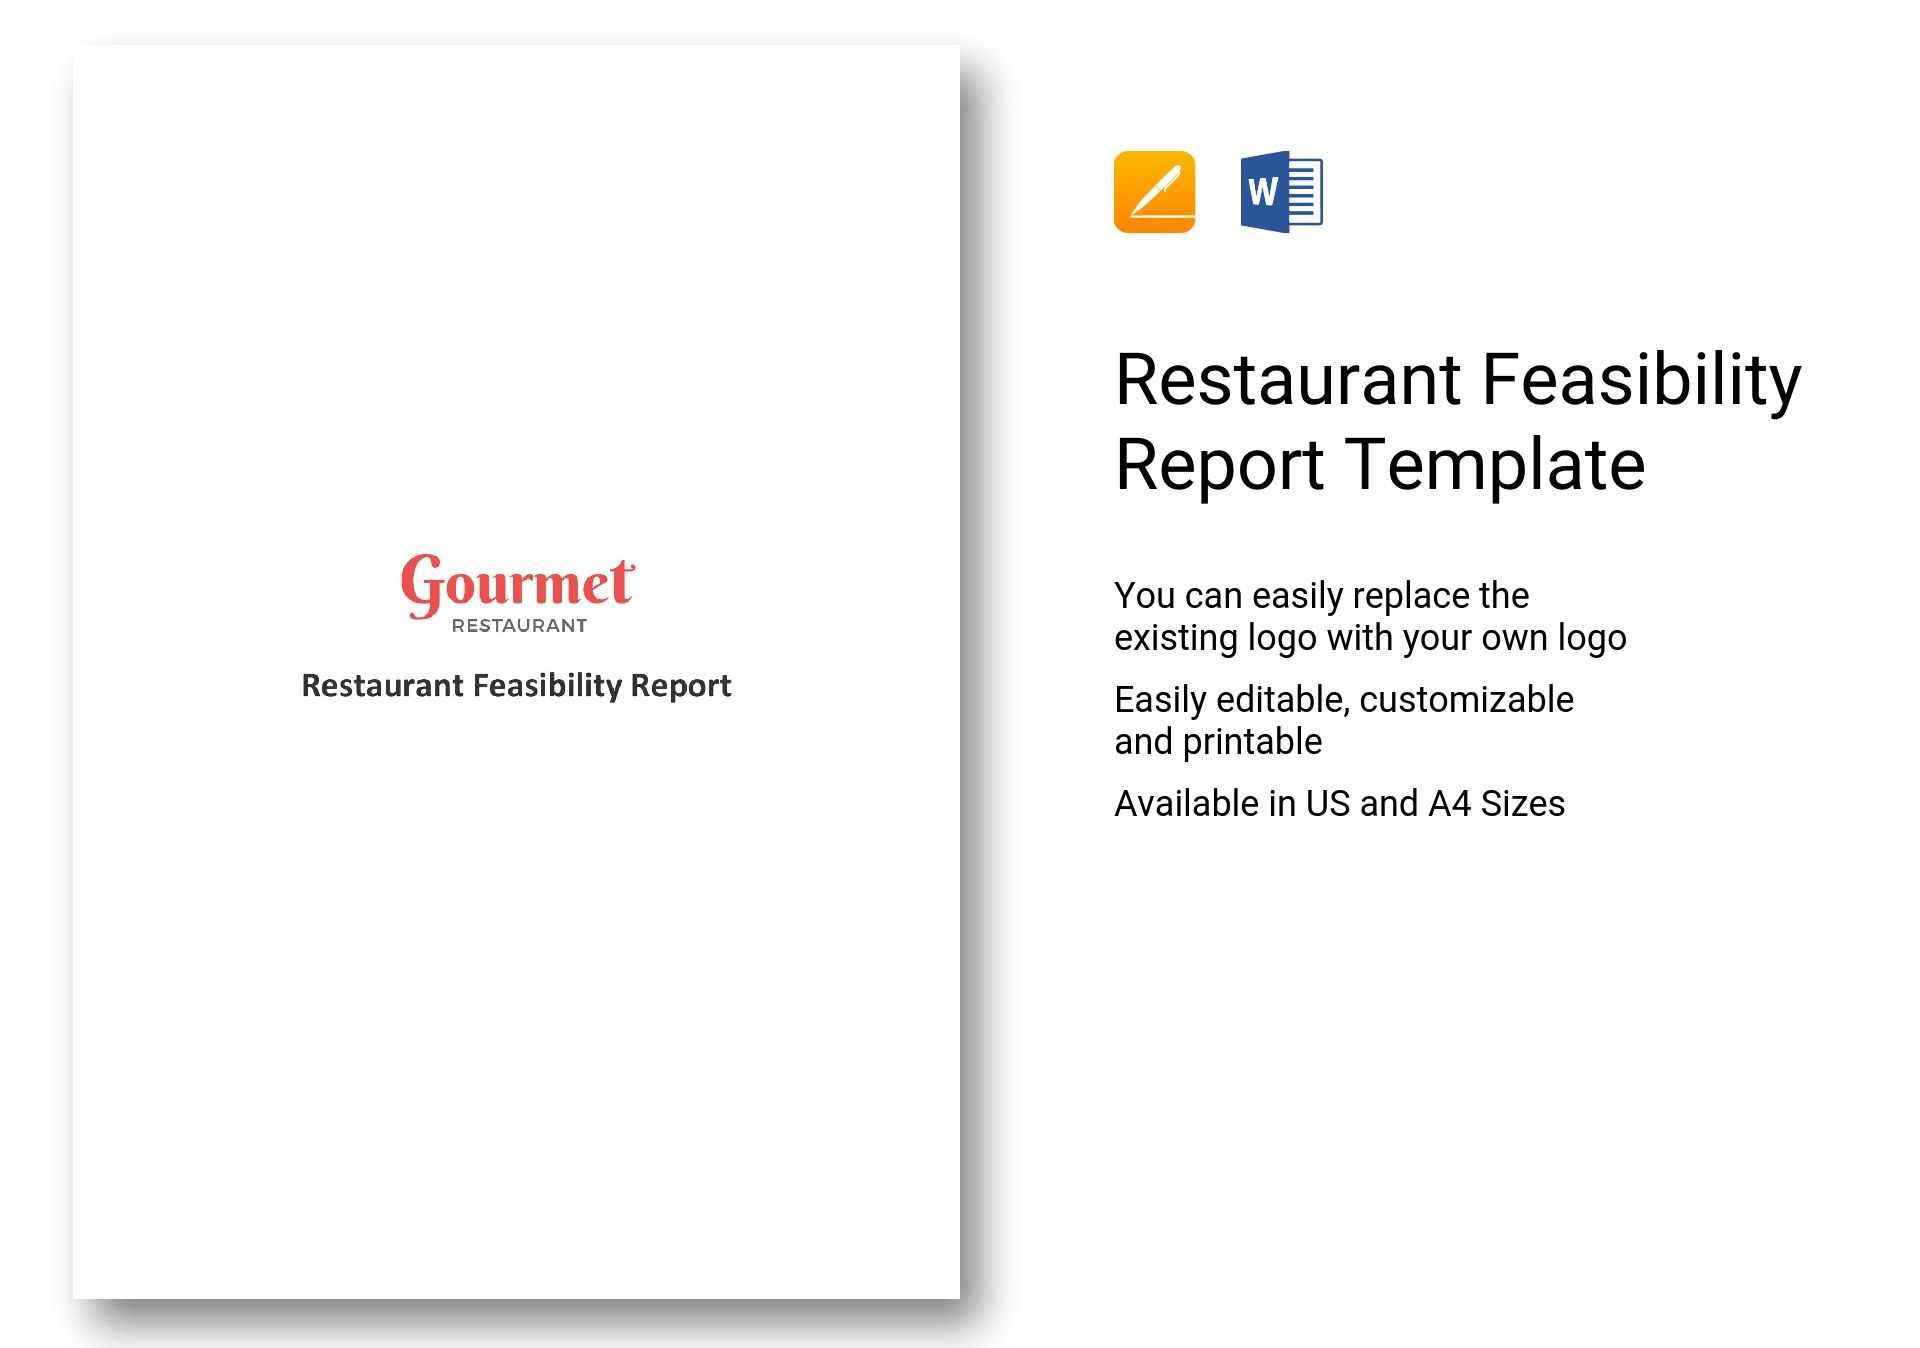 Restaurant Feasibility Report Template In Word, Apple Pages Inside Technical Feasibility Report Template